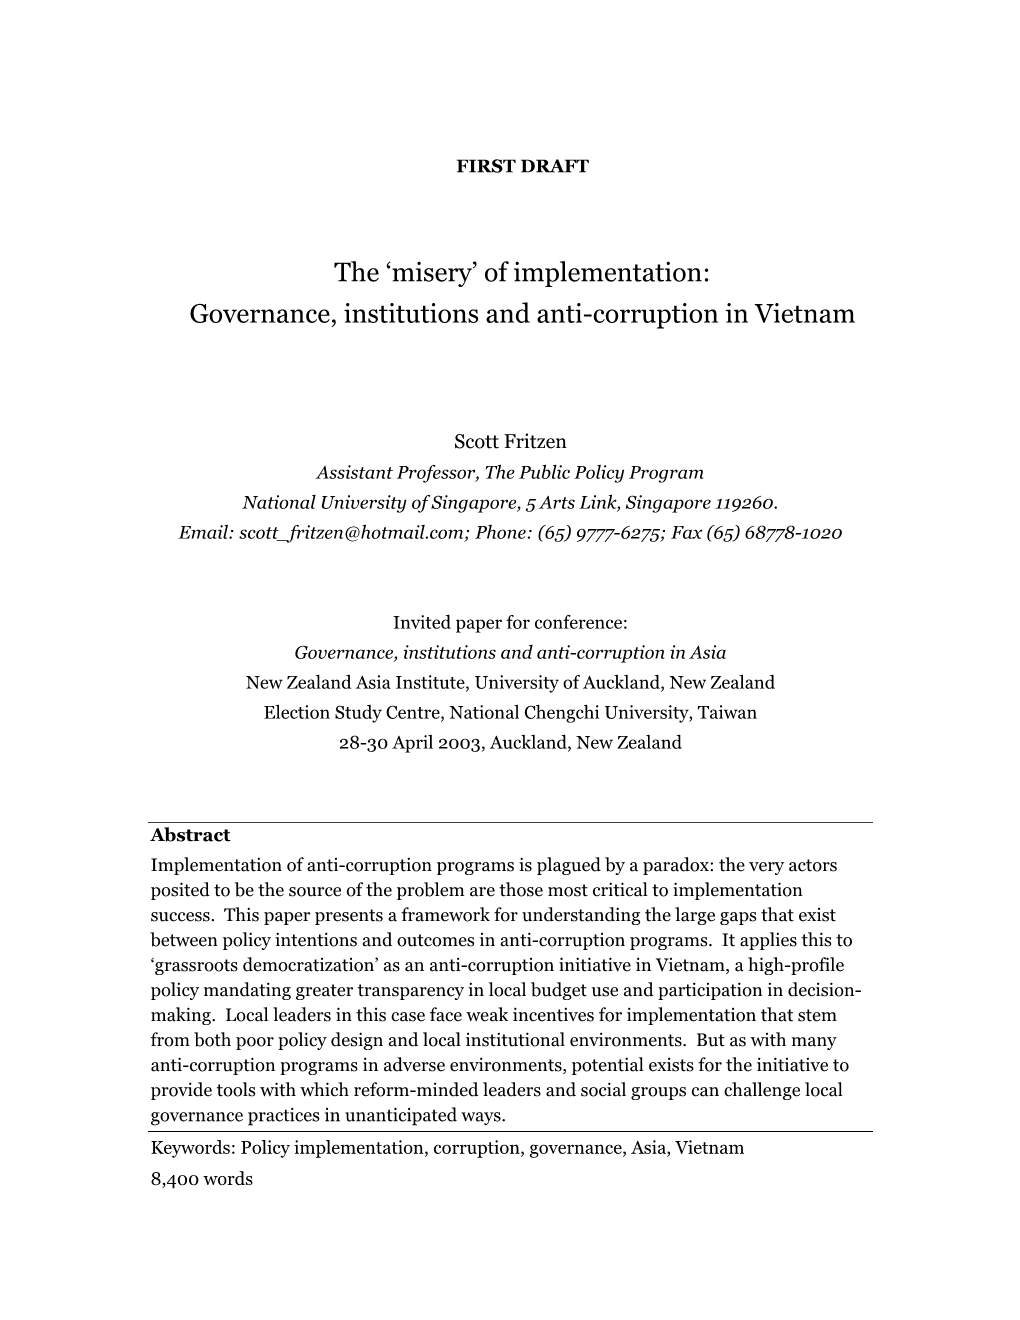 Governance, Institutions and Anti-Corruption in Vietnam